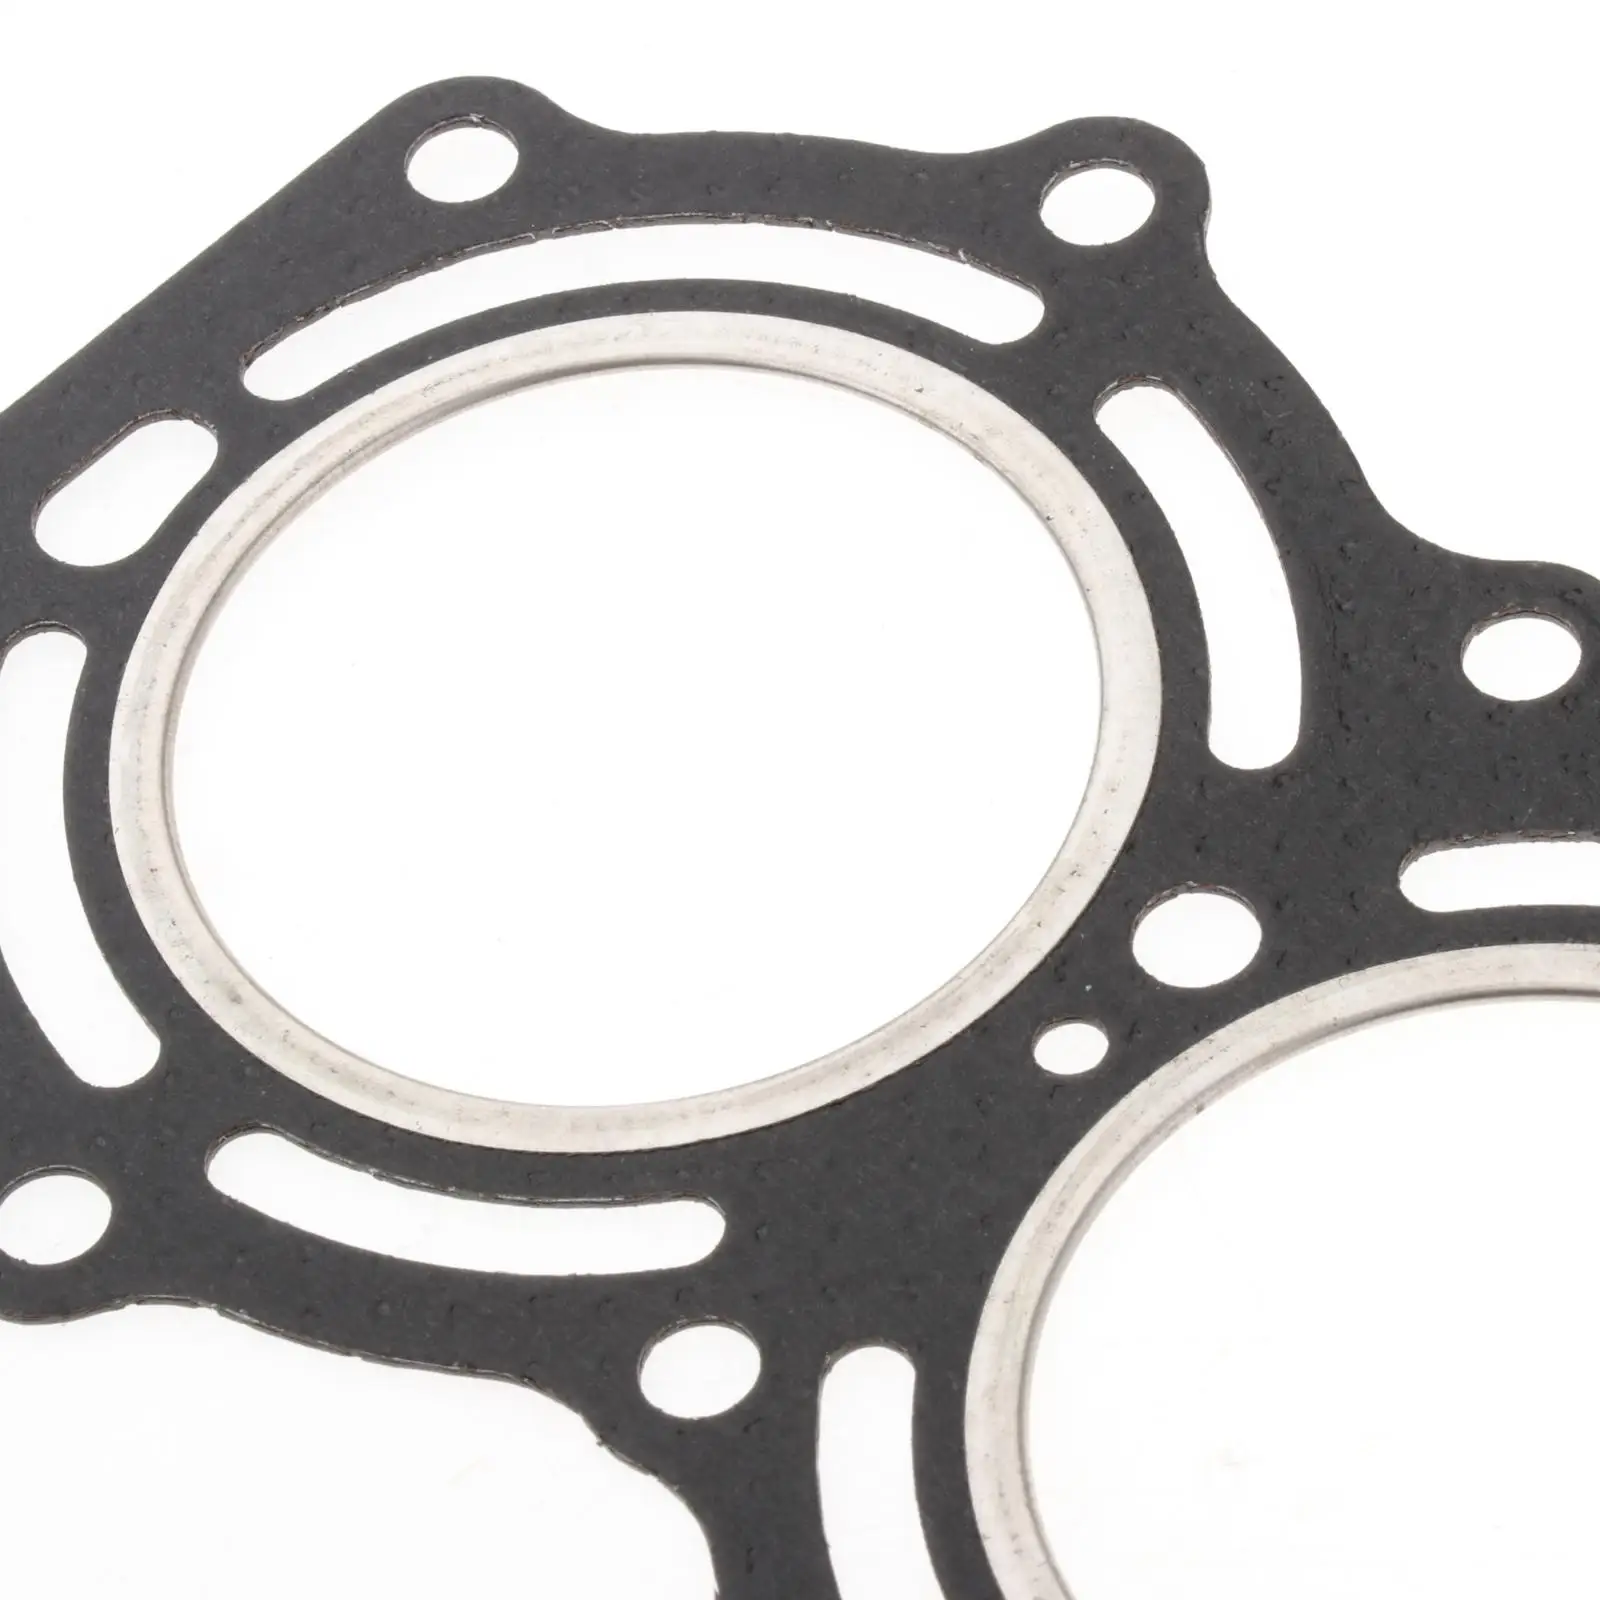 Cylinder Head Gasket 3B2-01005 for Tohatsu 2 Stroke 6HP 8HP 9.8HP Outboards